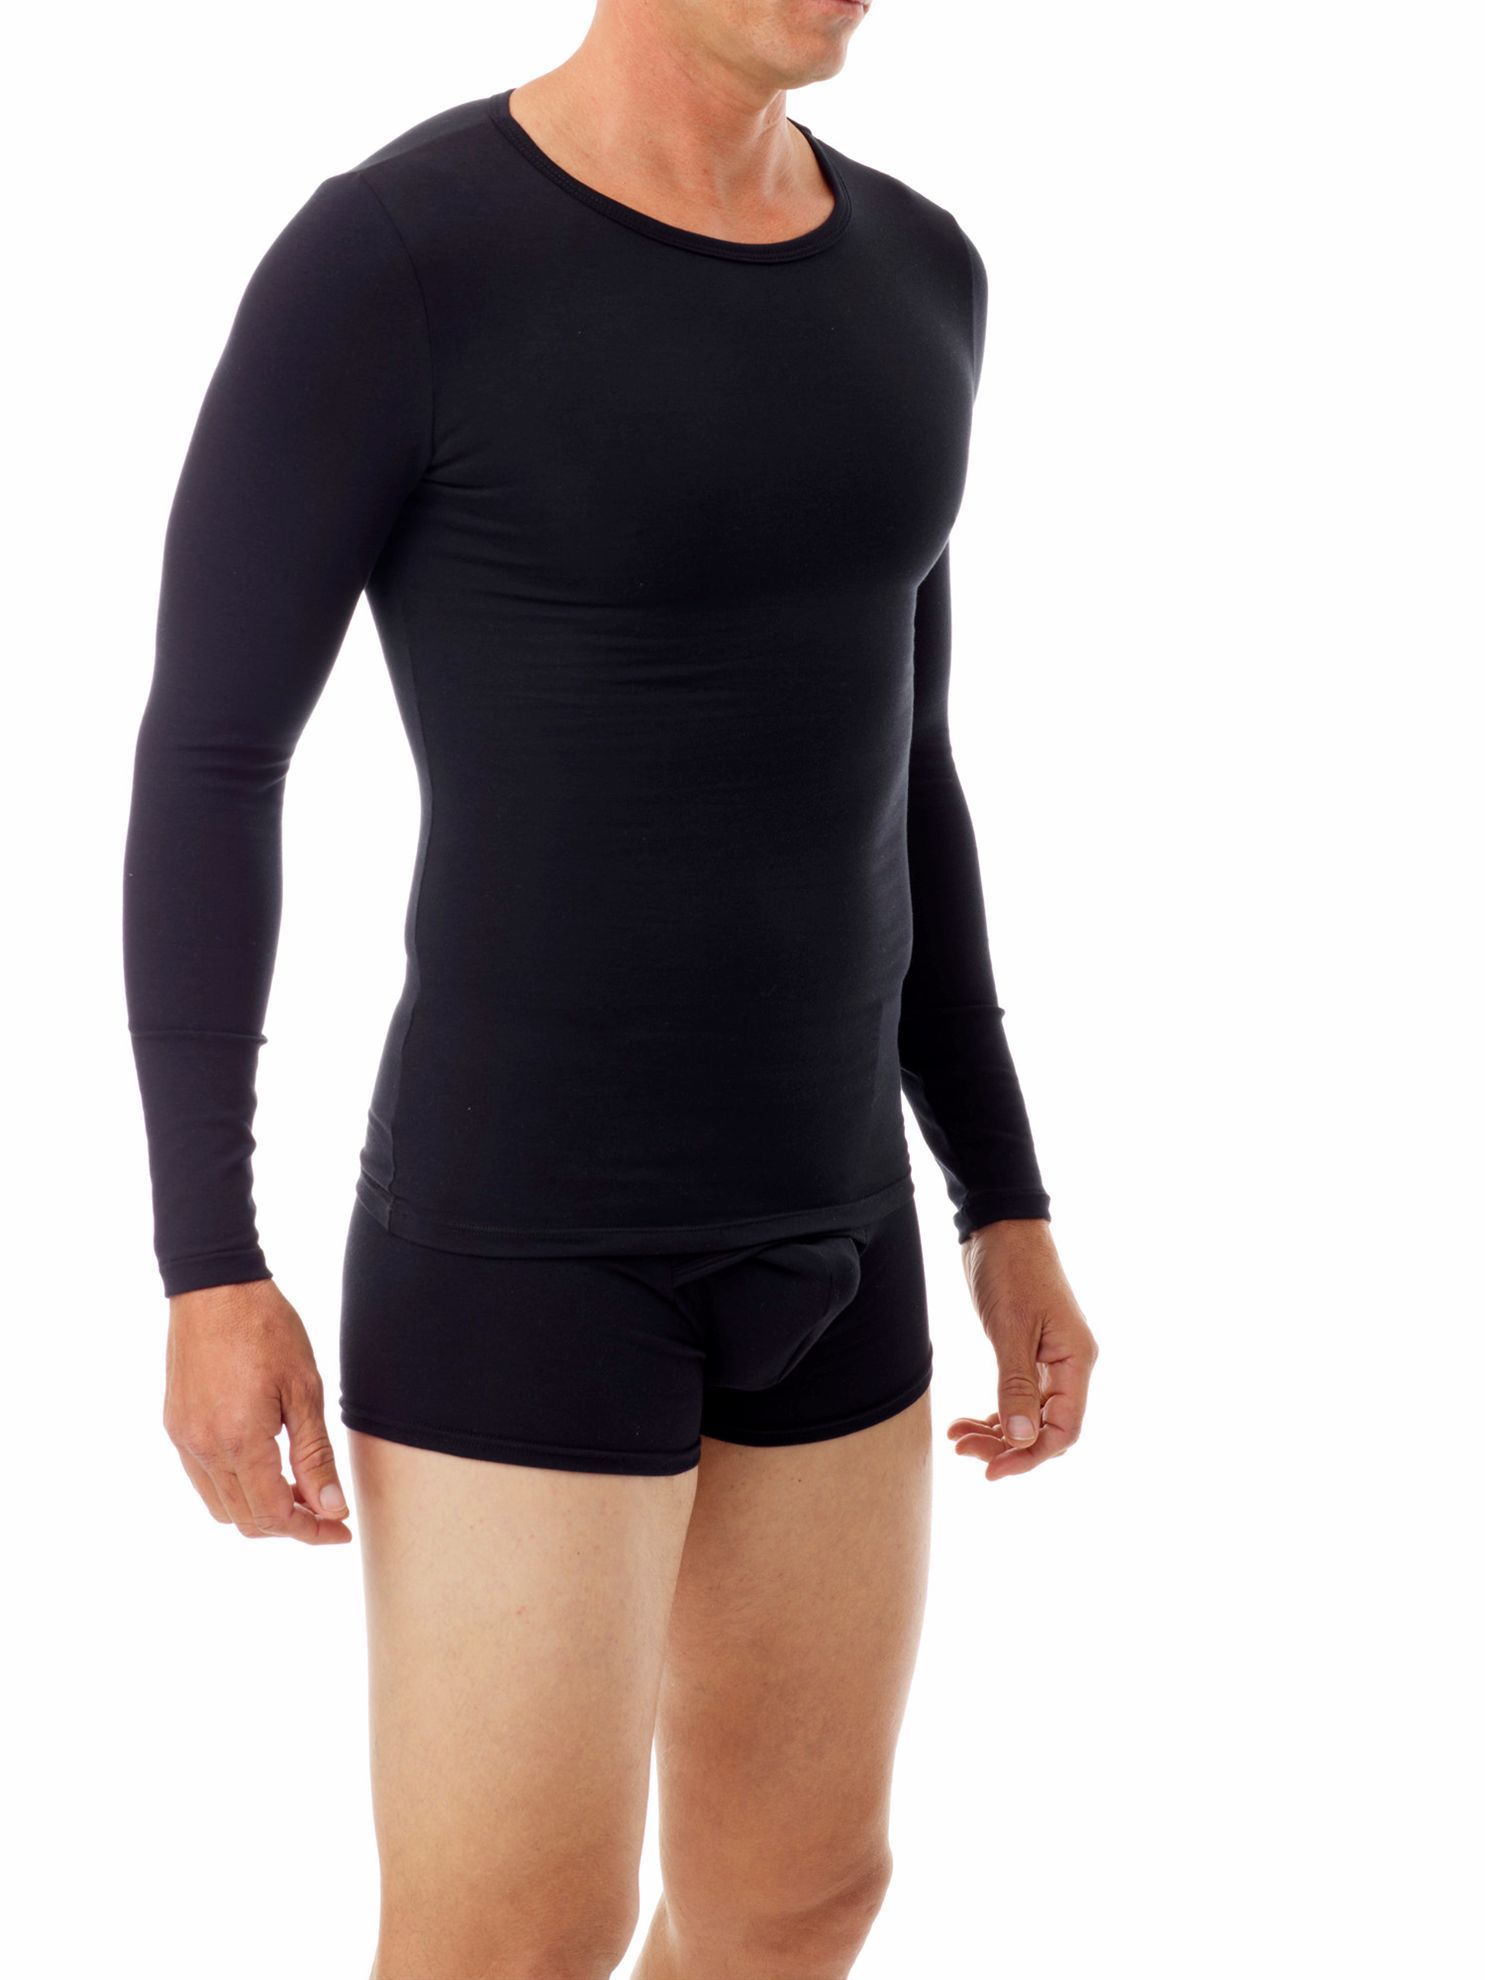  Underworks Mens Cotton Spandex Compression Tank, Small, Black :  Clothing, Shoes & Jewelry